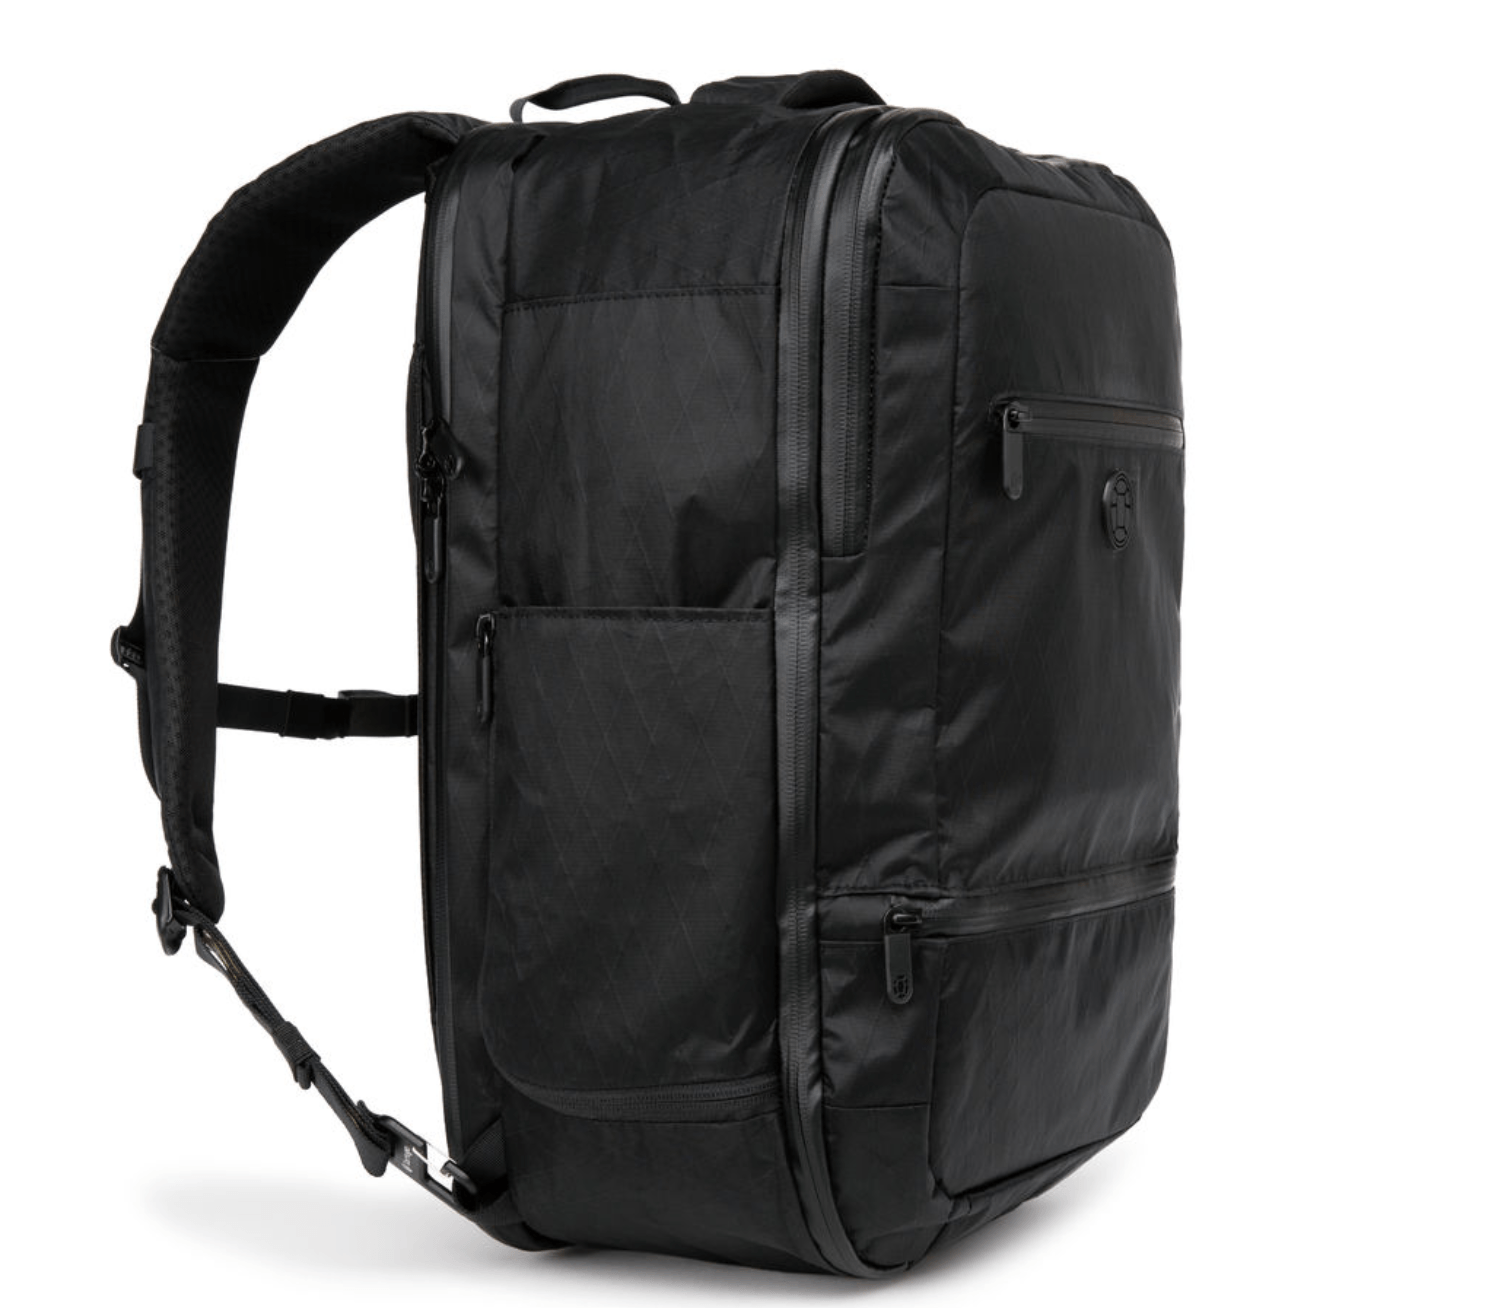 Tortuga Laptop backpack review